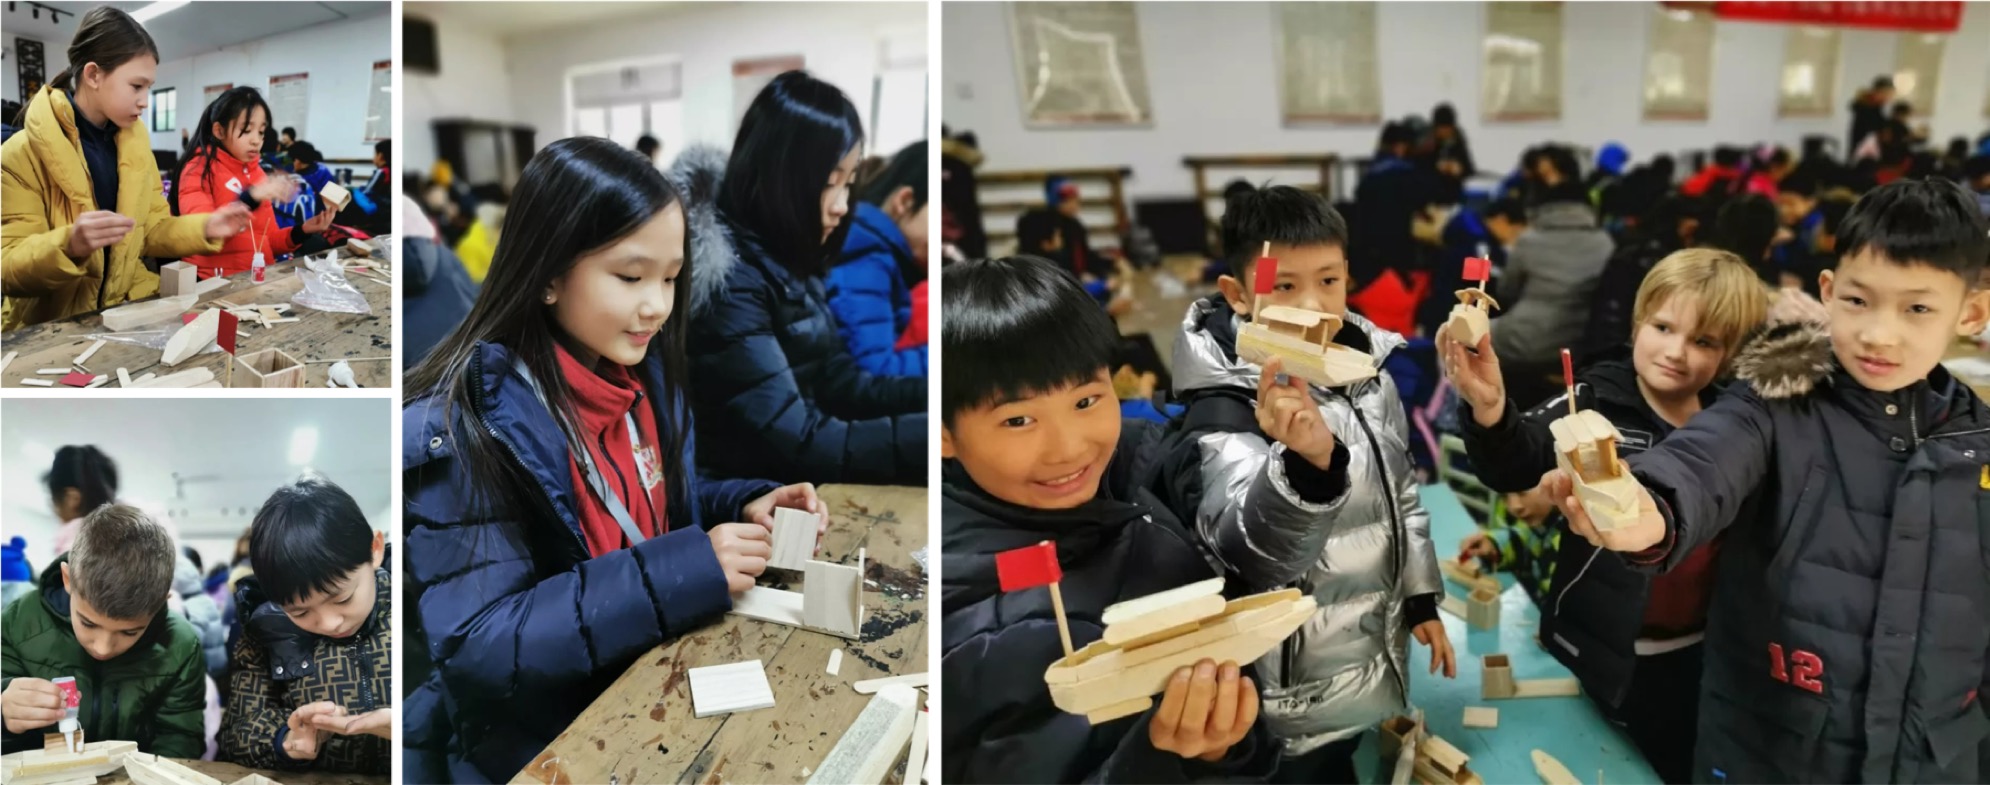 Students doing traditional Chinese woodworking